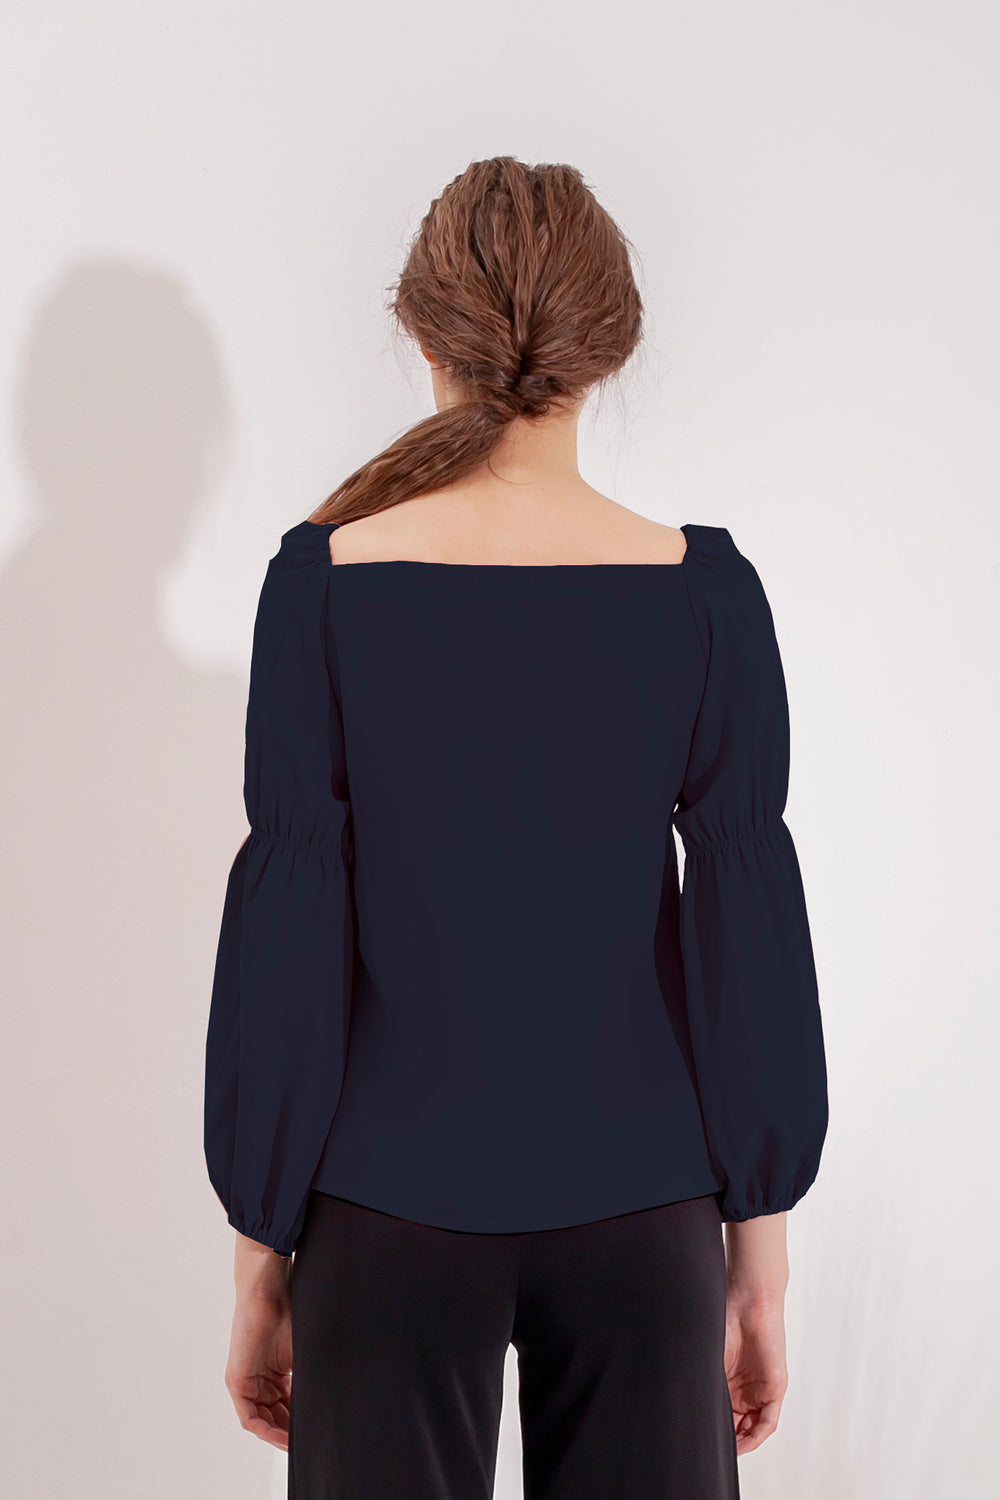 Domani Idalia Prussian Top Modest Loose Fitting Long Sleeve Navy Top for Women with Puff and Gathered Sleeves in Polyester and Cotton